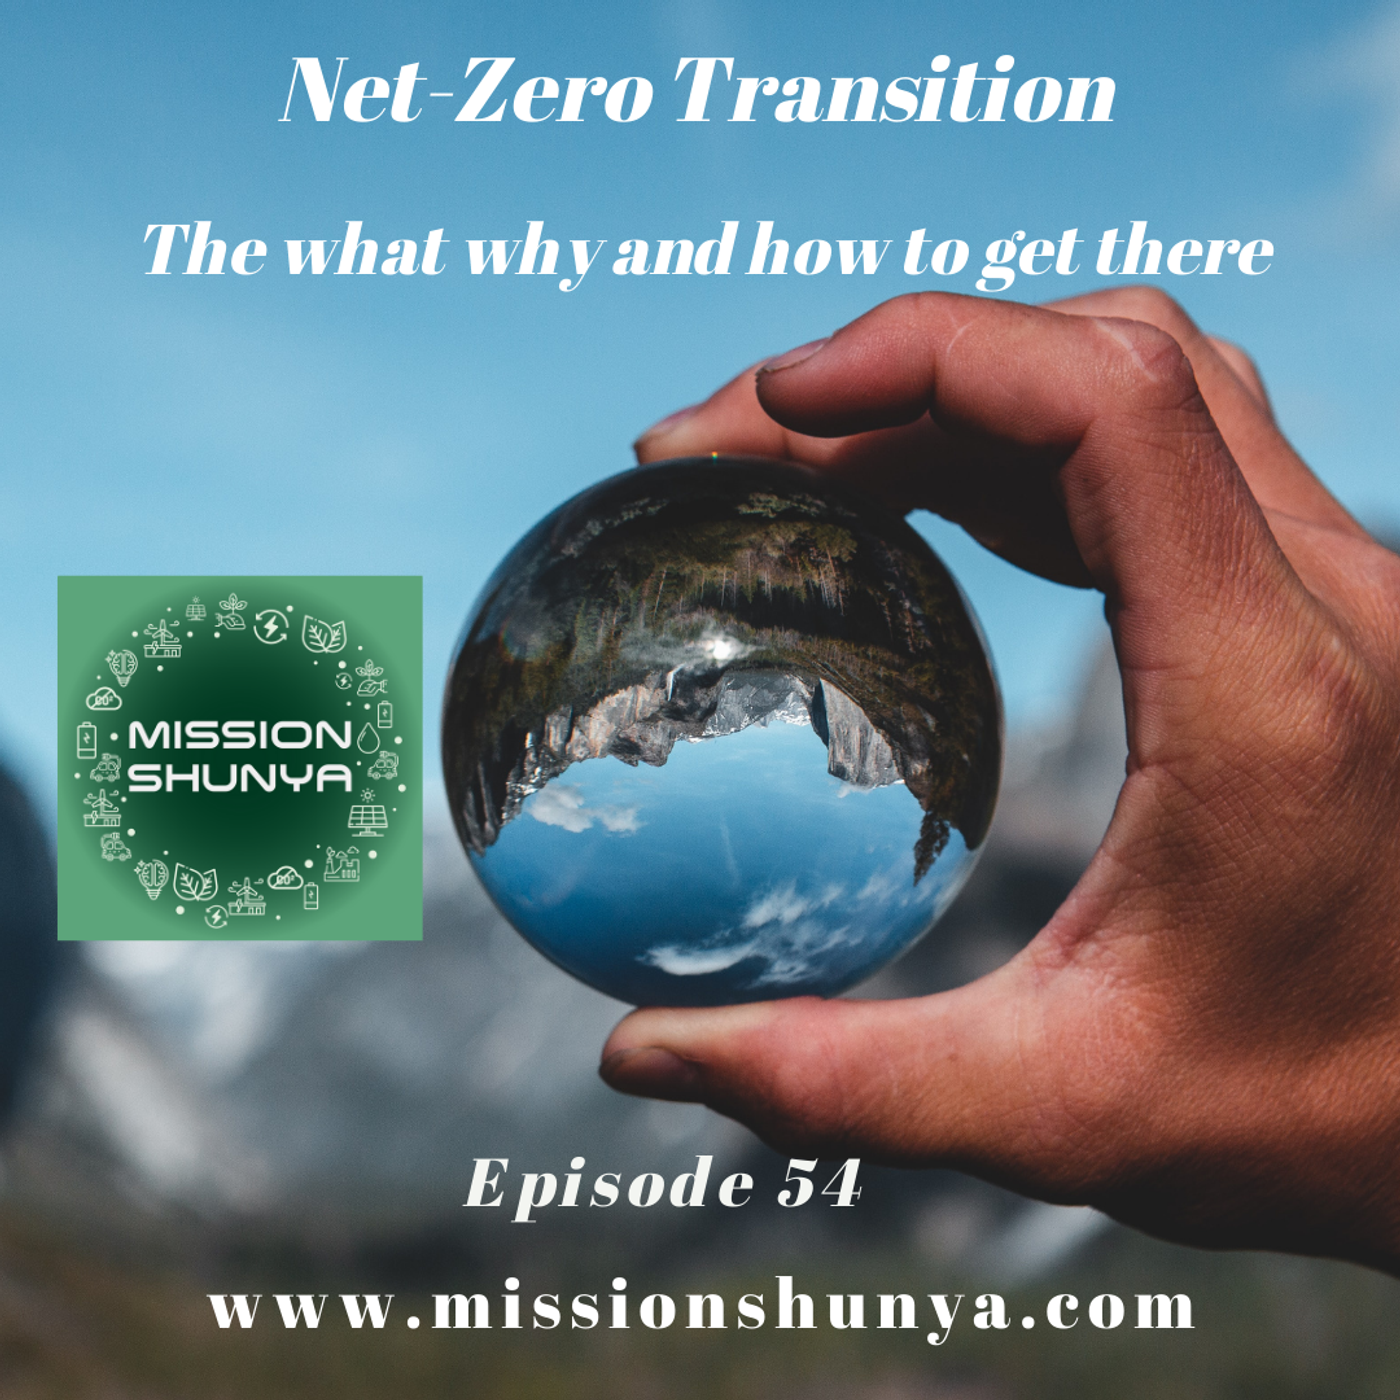 54: Net-Zero Transition: The what why and how to get there